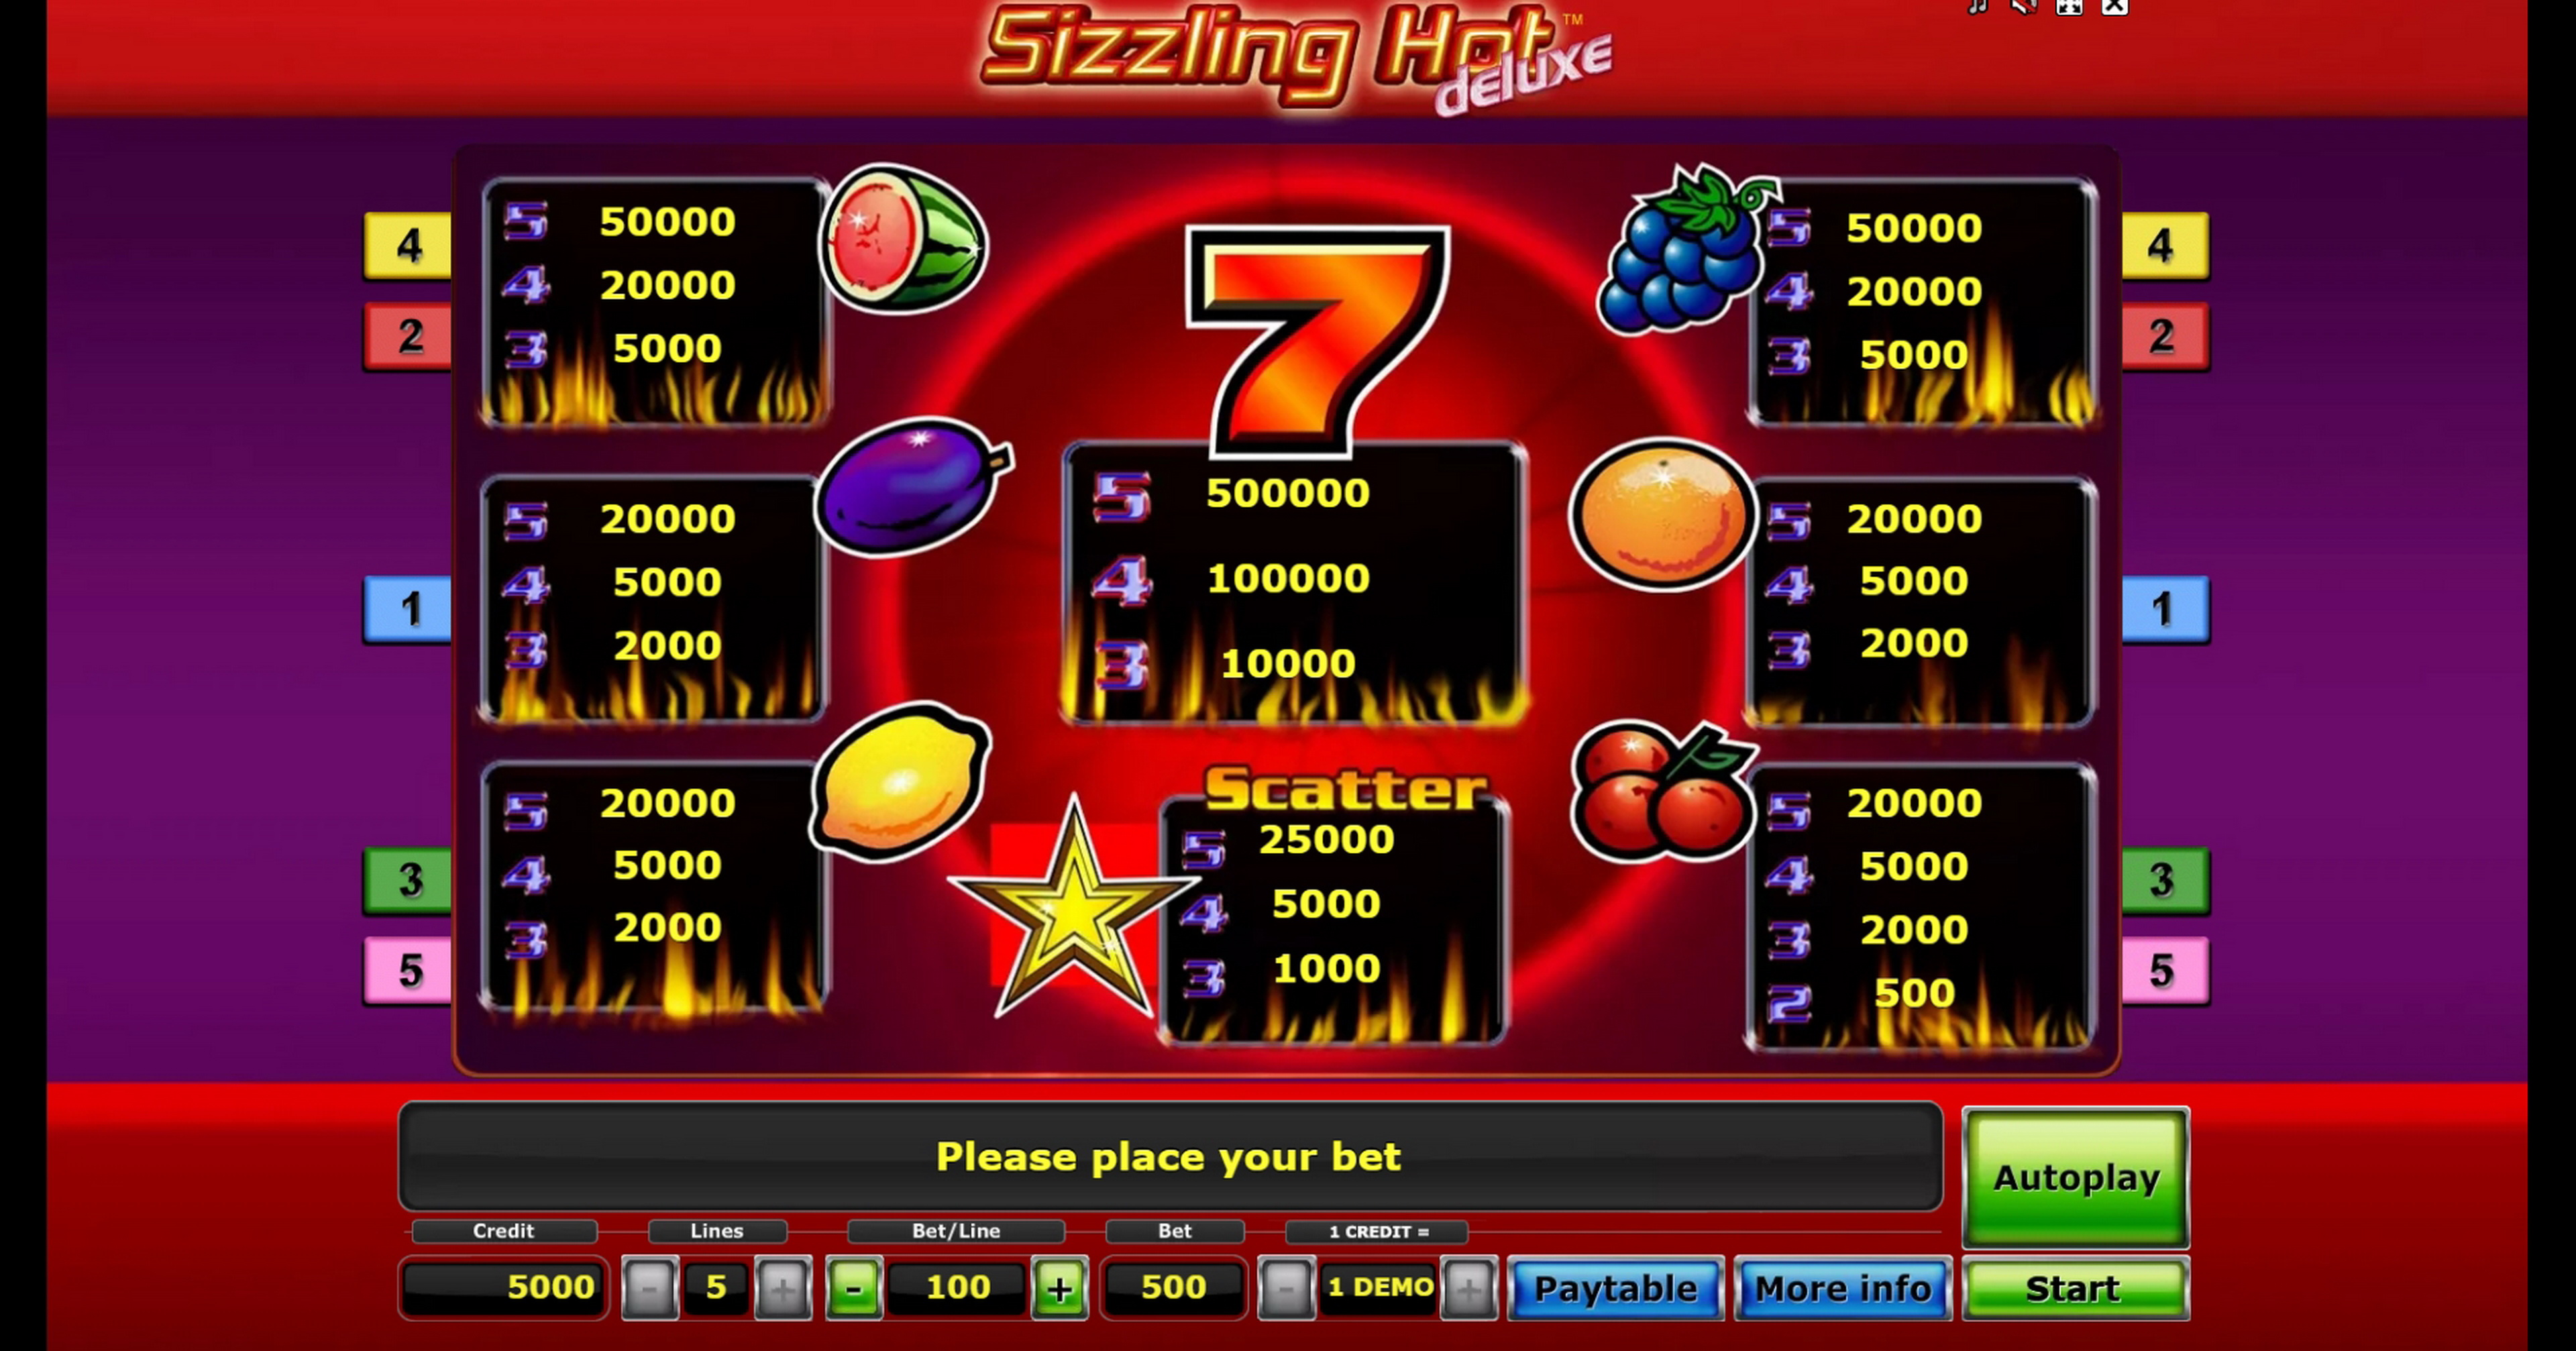 Info of Sizzling Hot deluxe Slot Game by Greentube